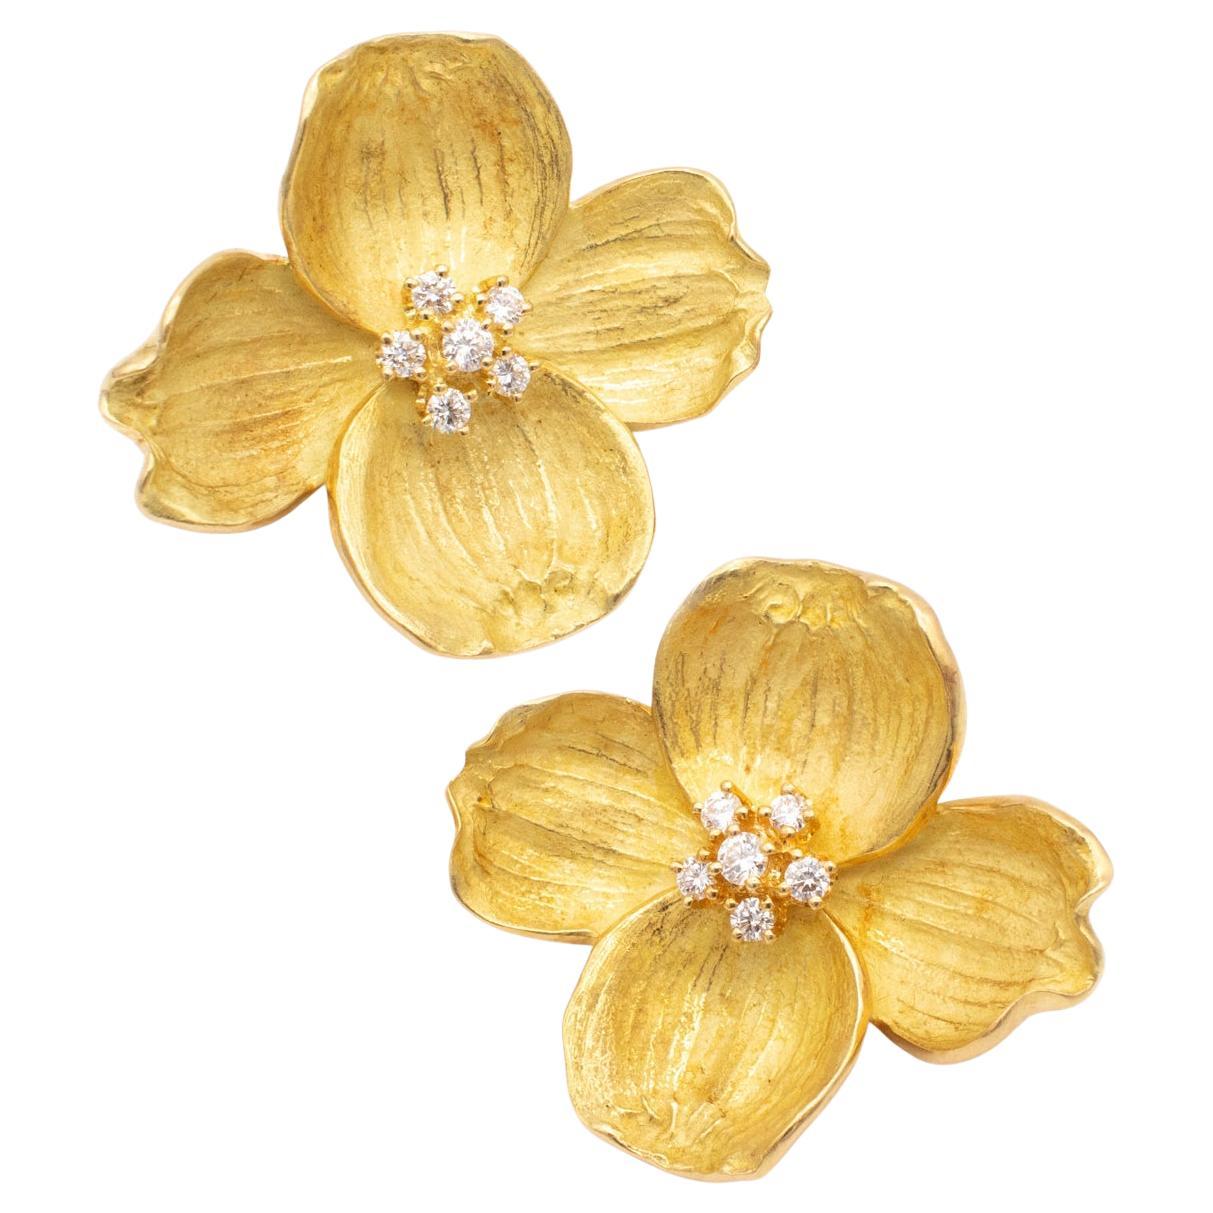 Tiffany Co Dogwood Flowers Extra Large Earrings In 18Kt Yellow Gold VS Diamonds